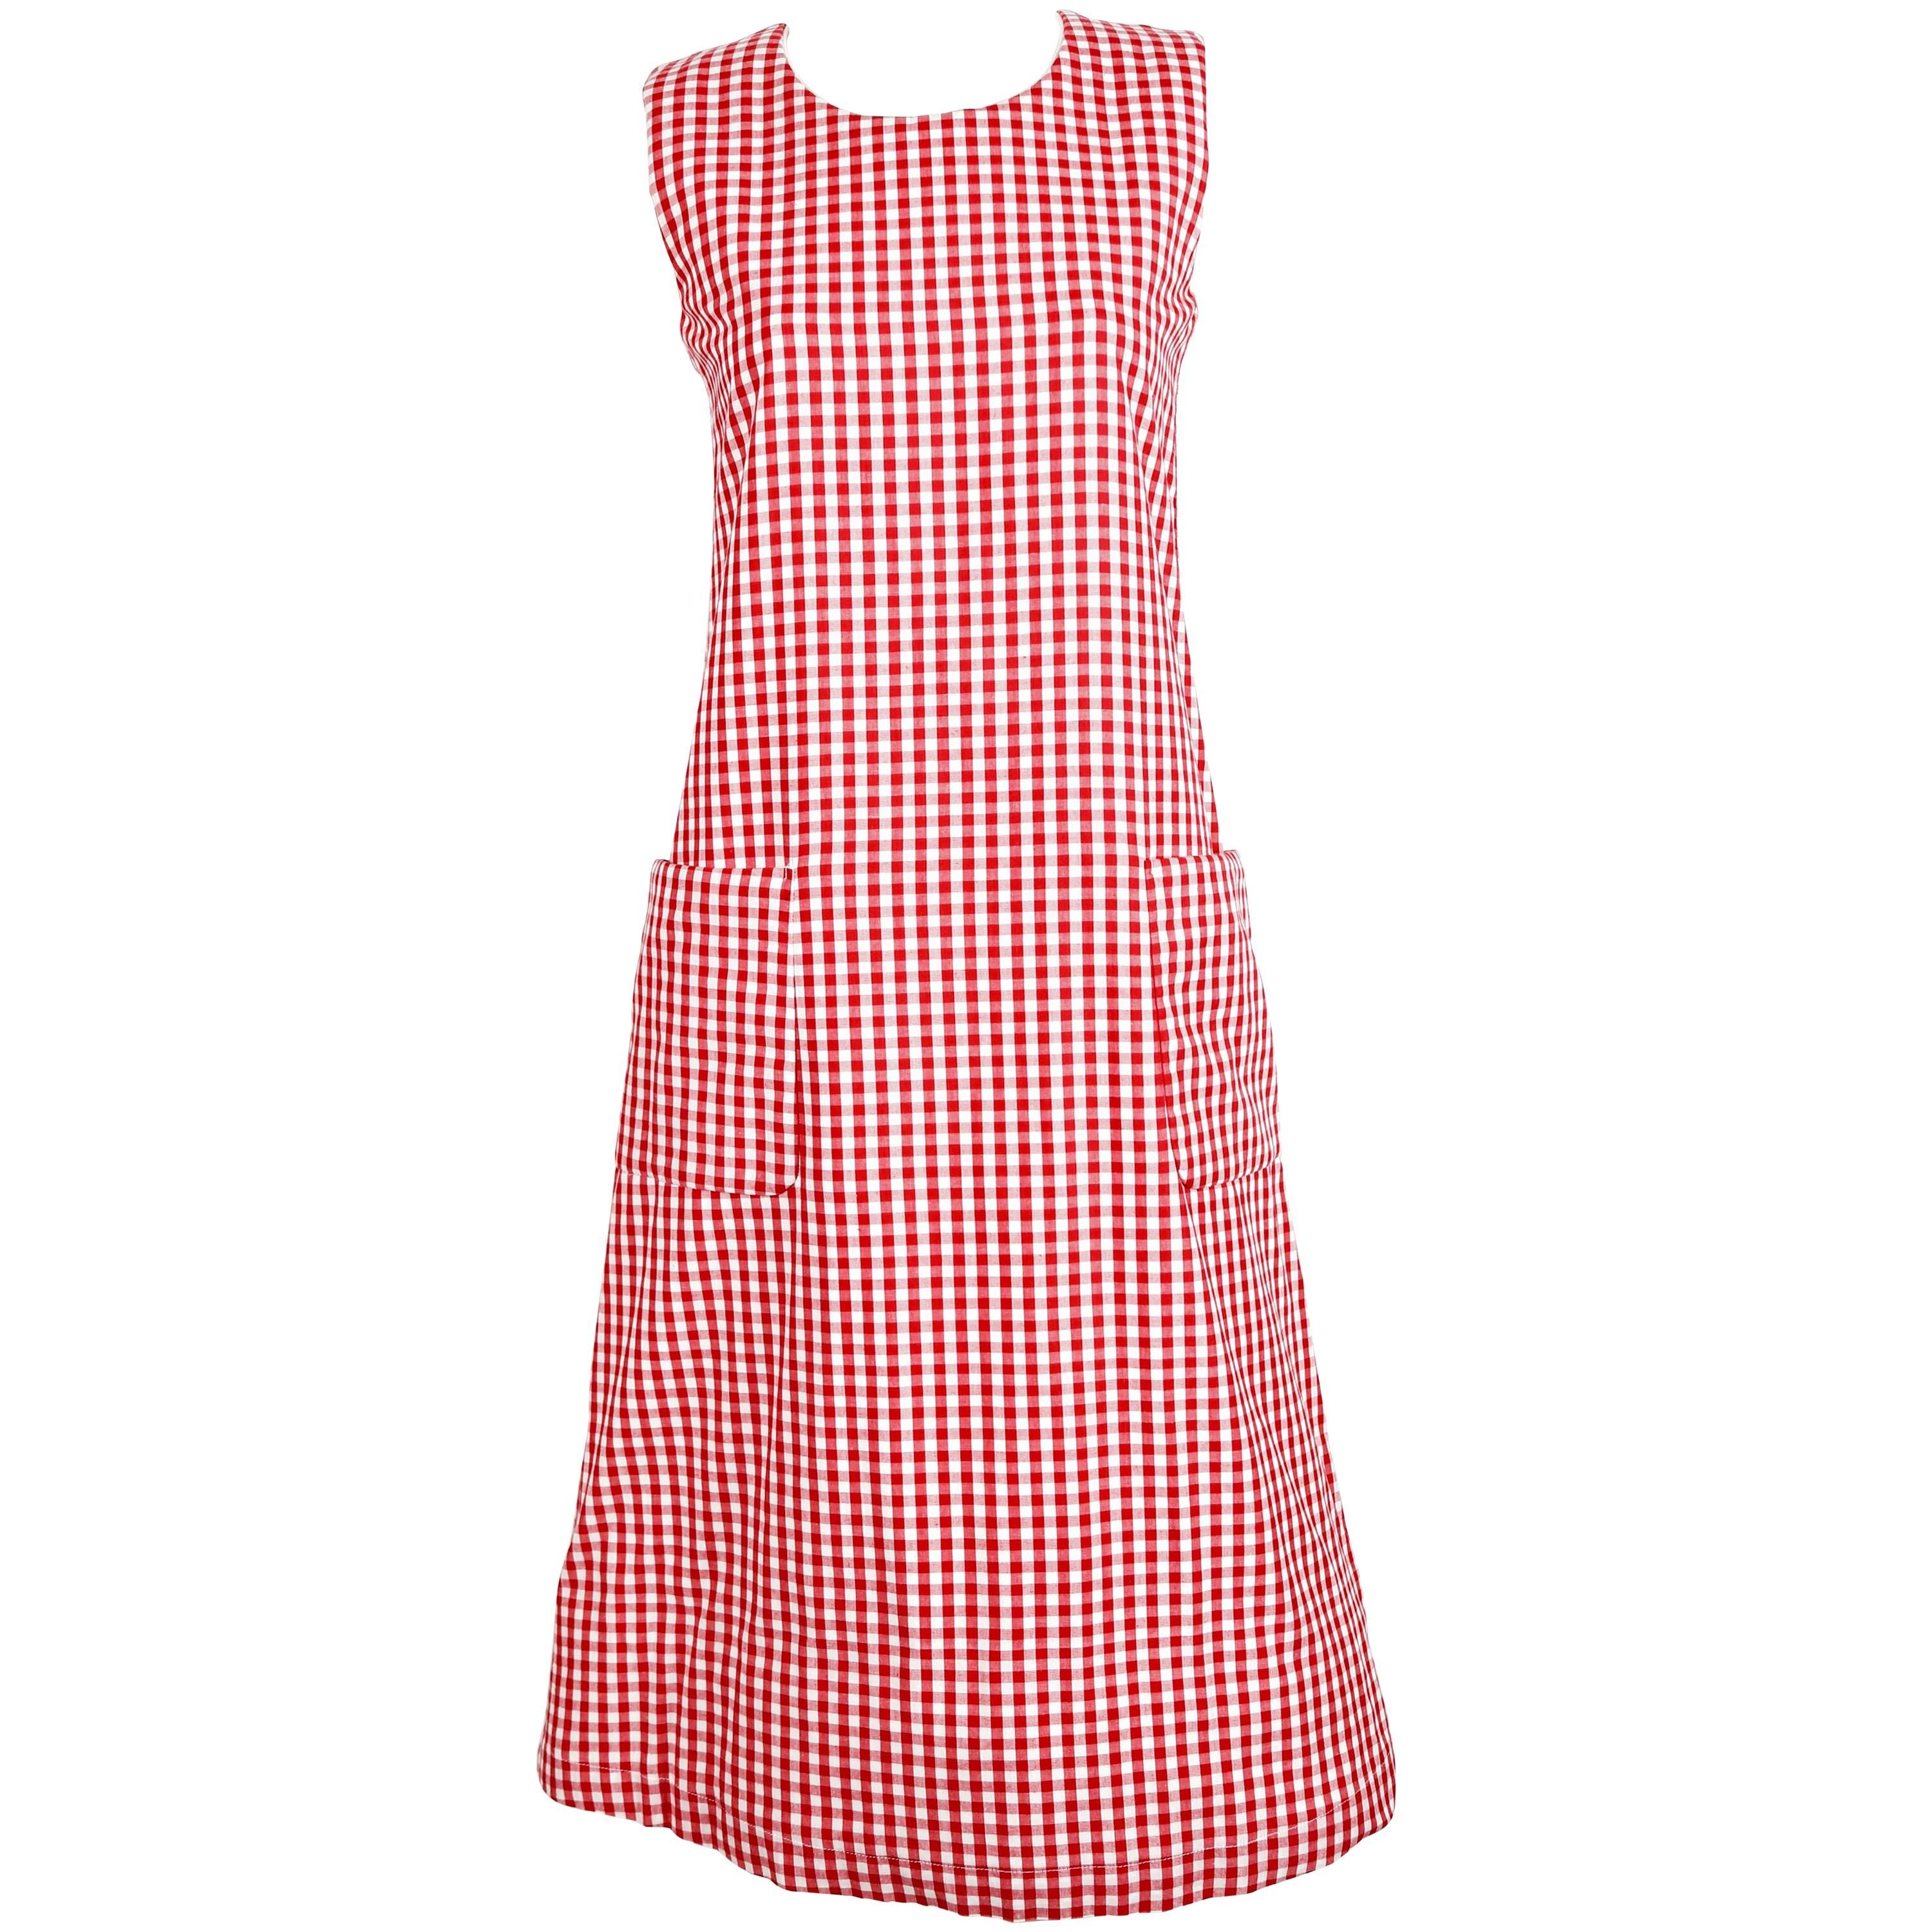 1997 COMME DES GARCONS red gingham padded dress 'BODY MEETS DRESS'